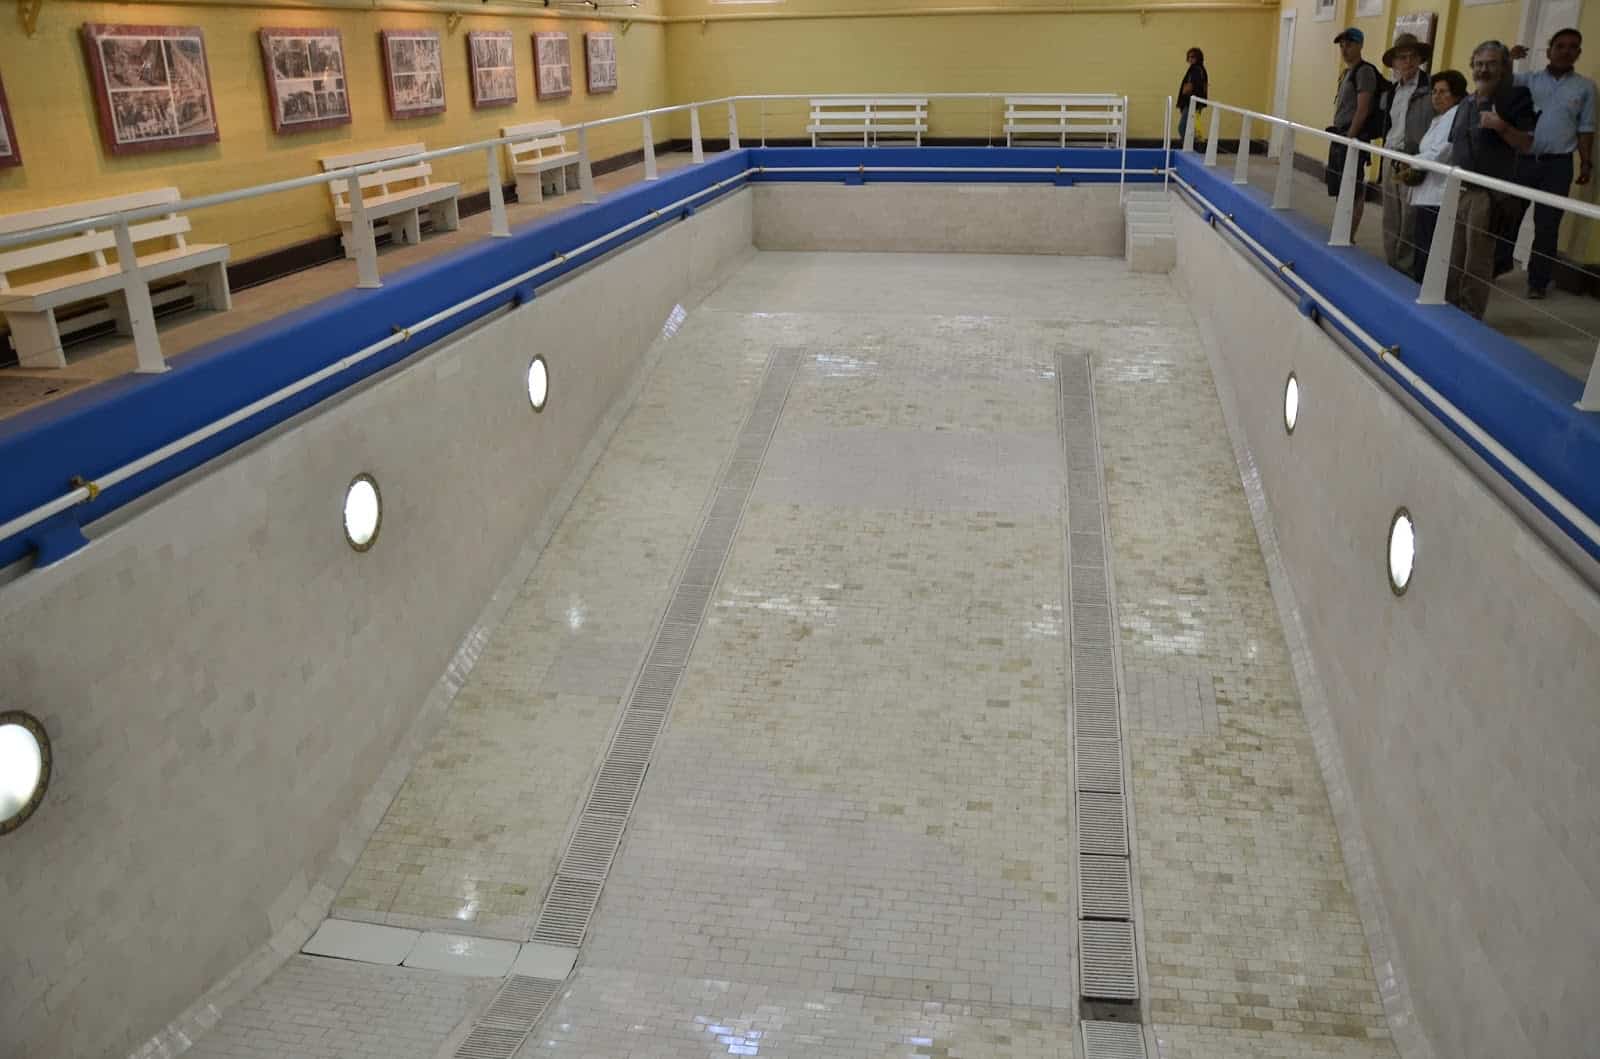 Indoor pool at Sewell Mining Town, Chile